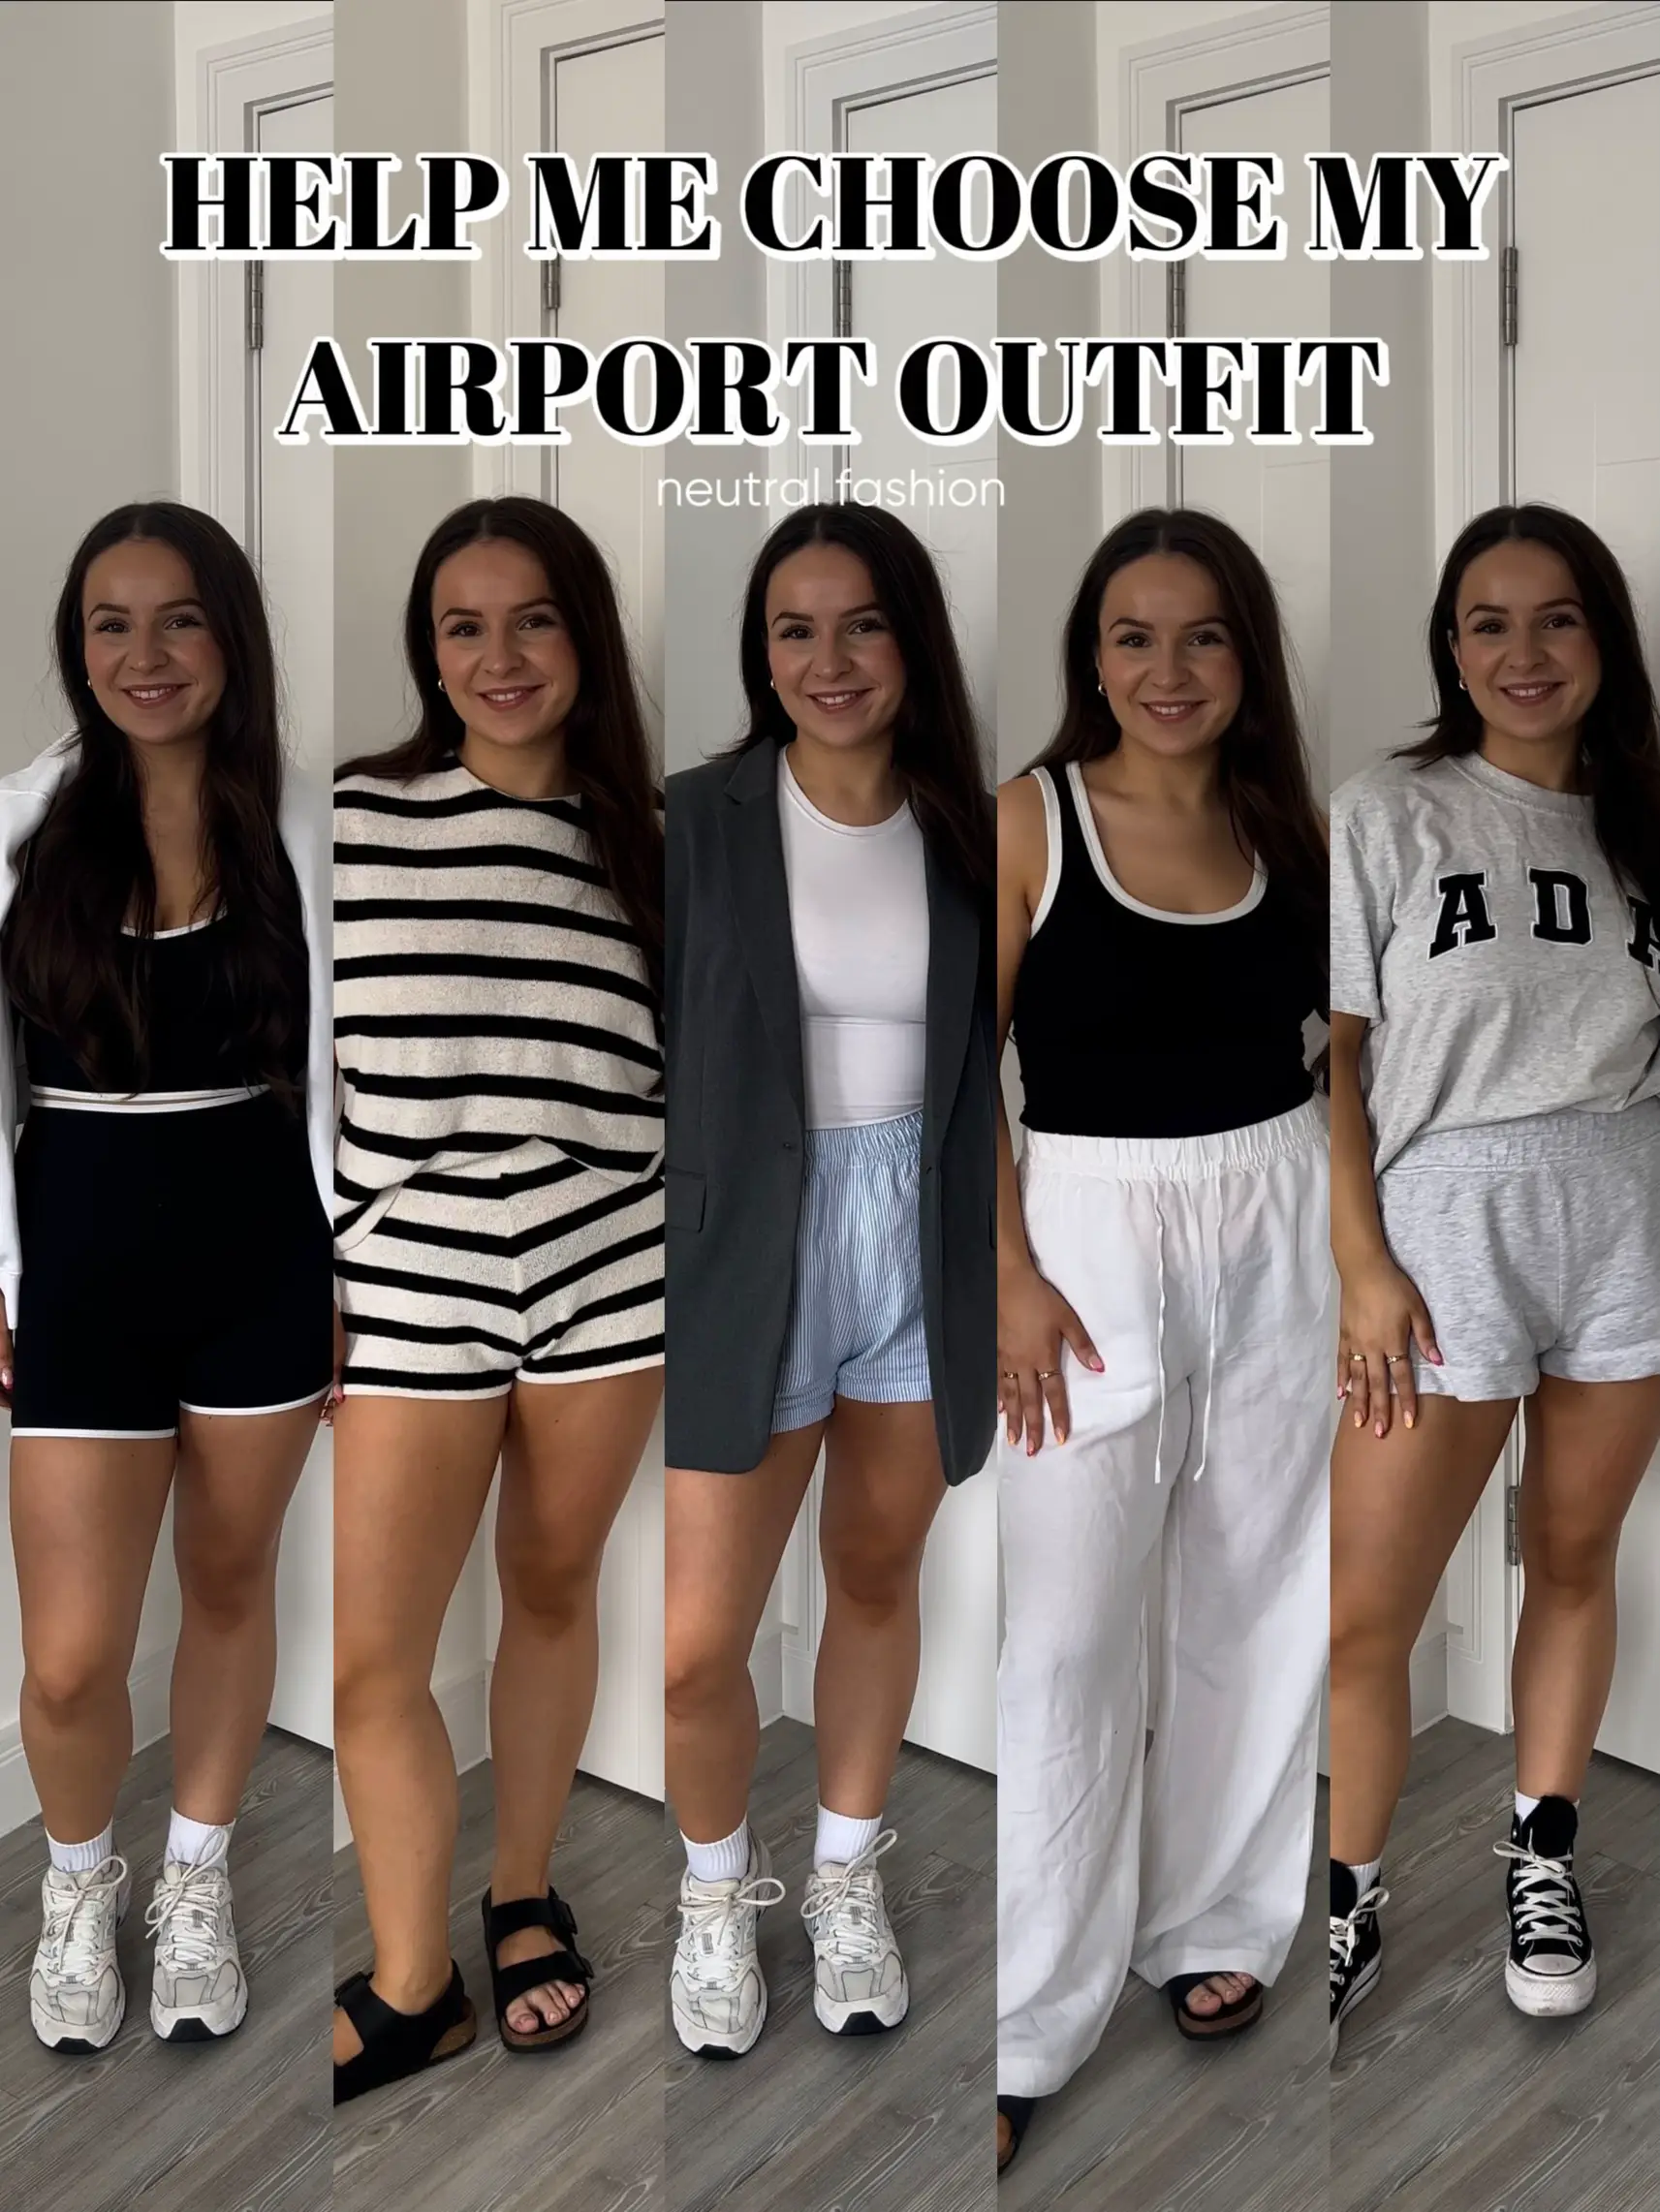 this was my airport outfit